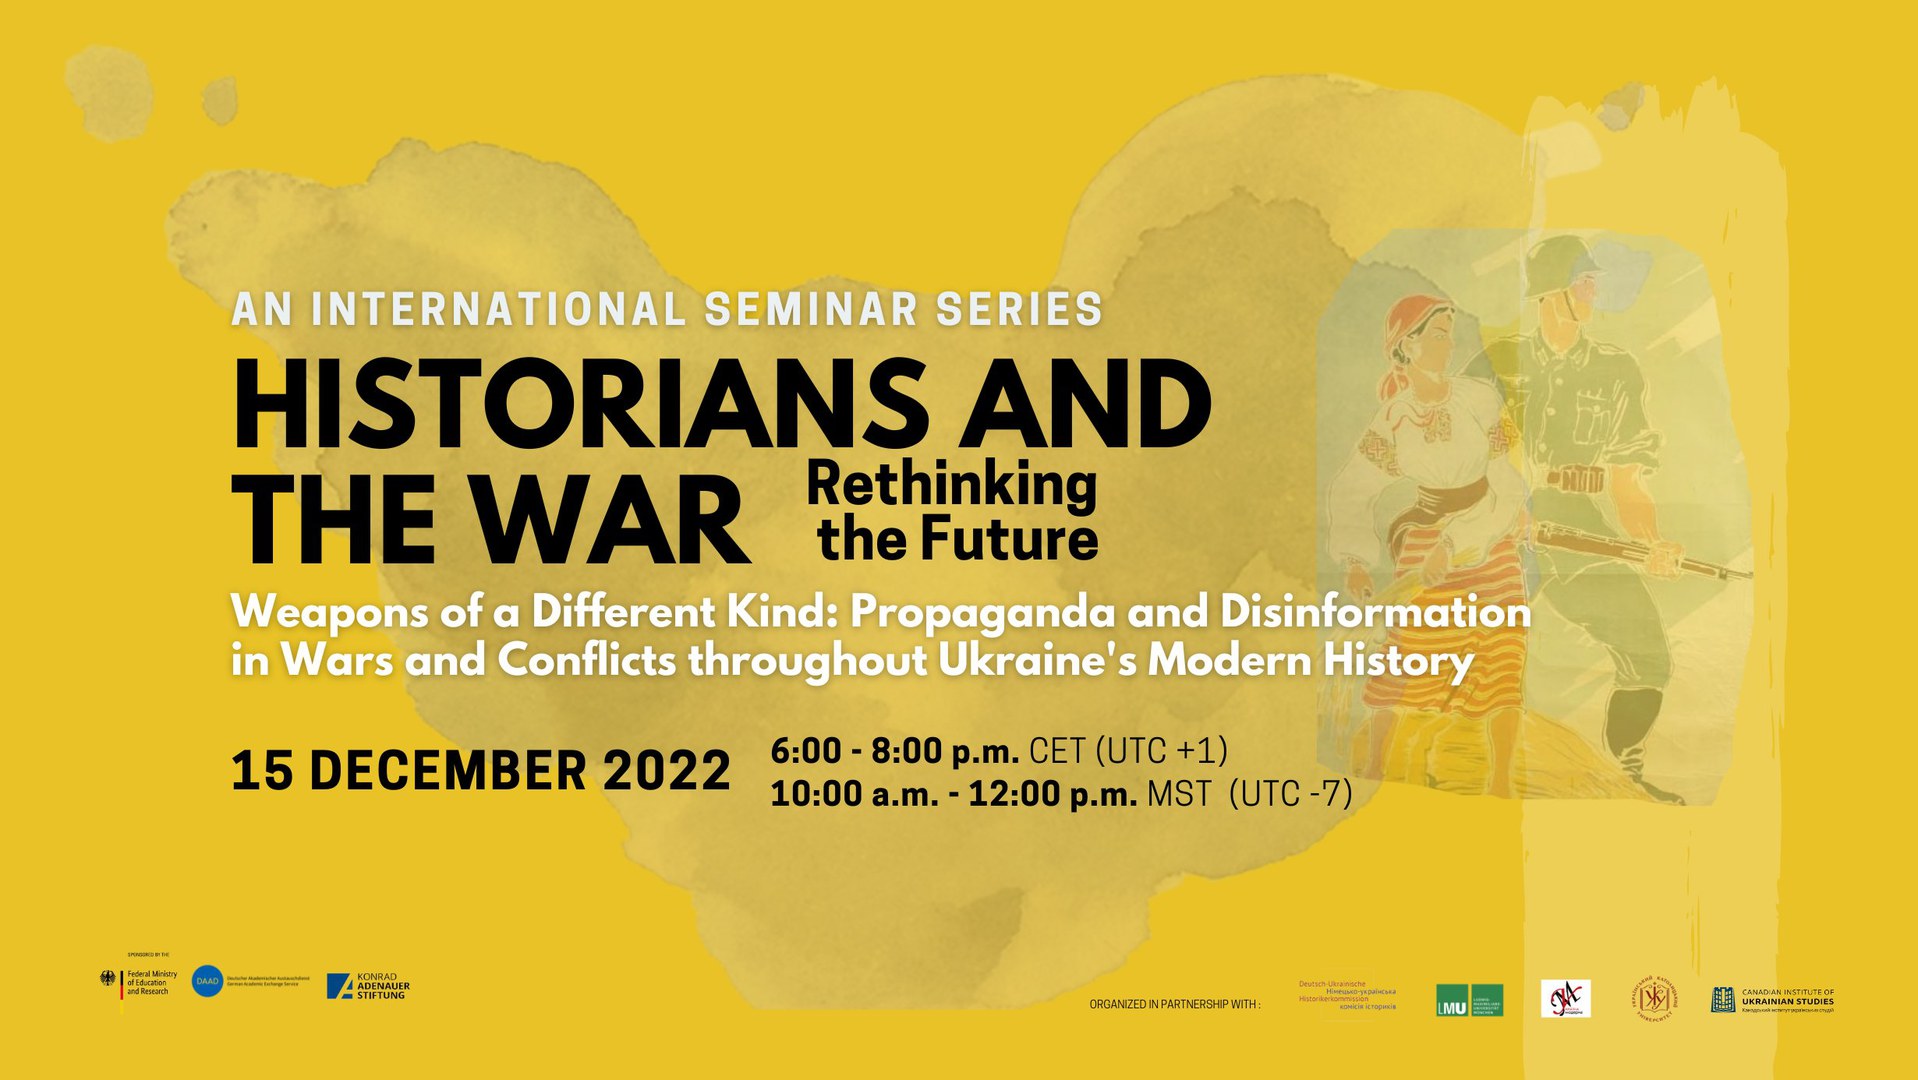 Online-Seminar: "Weapons of a different kind: Propaganda and disinformation in wars and conflicts throughout Ukraine's modern history"